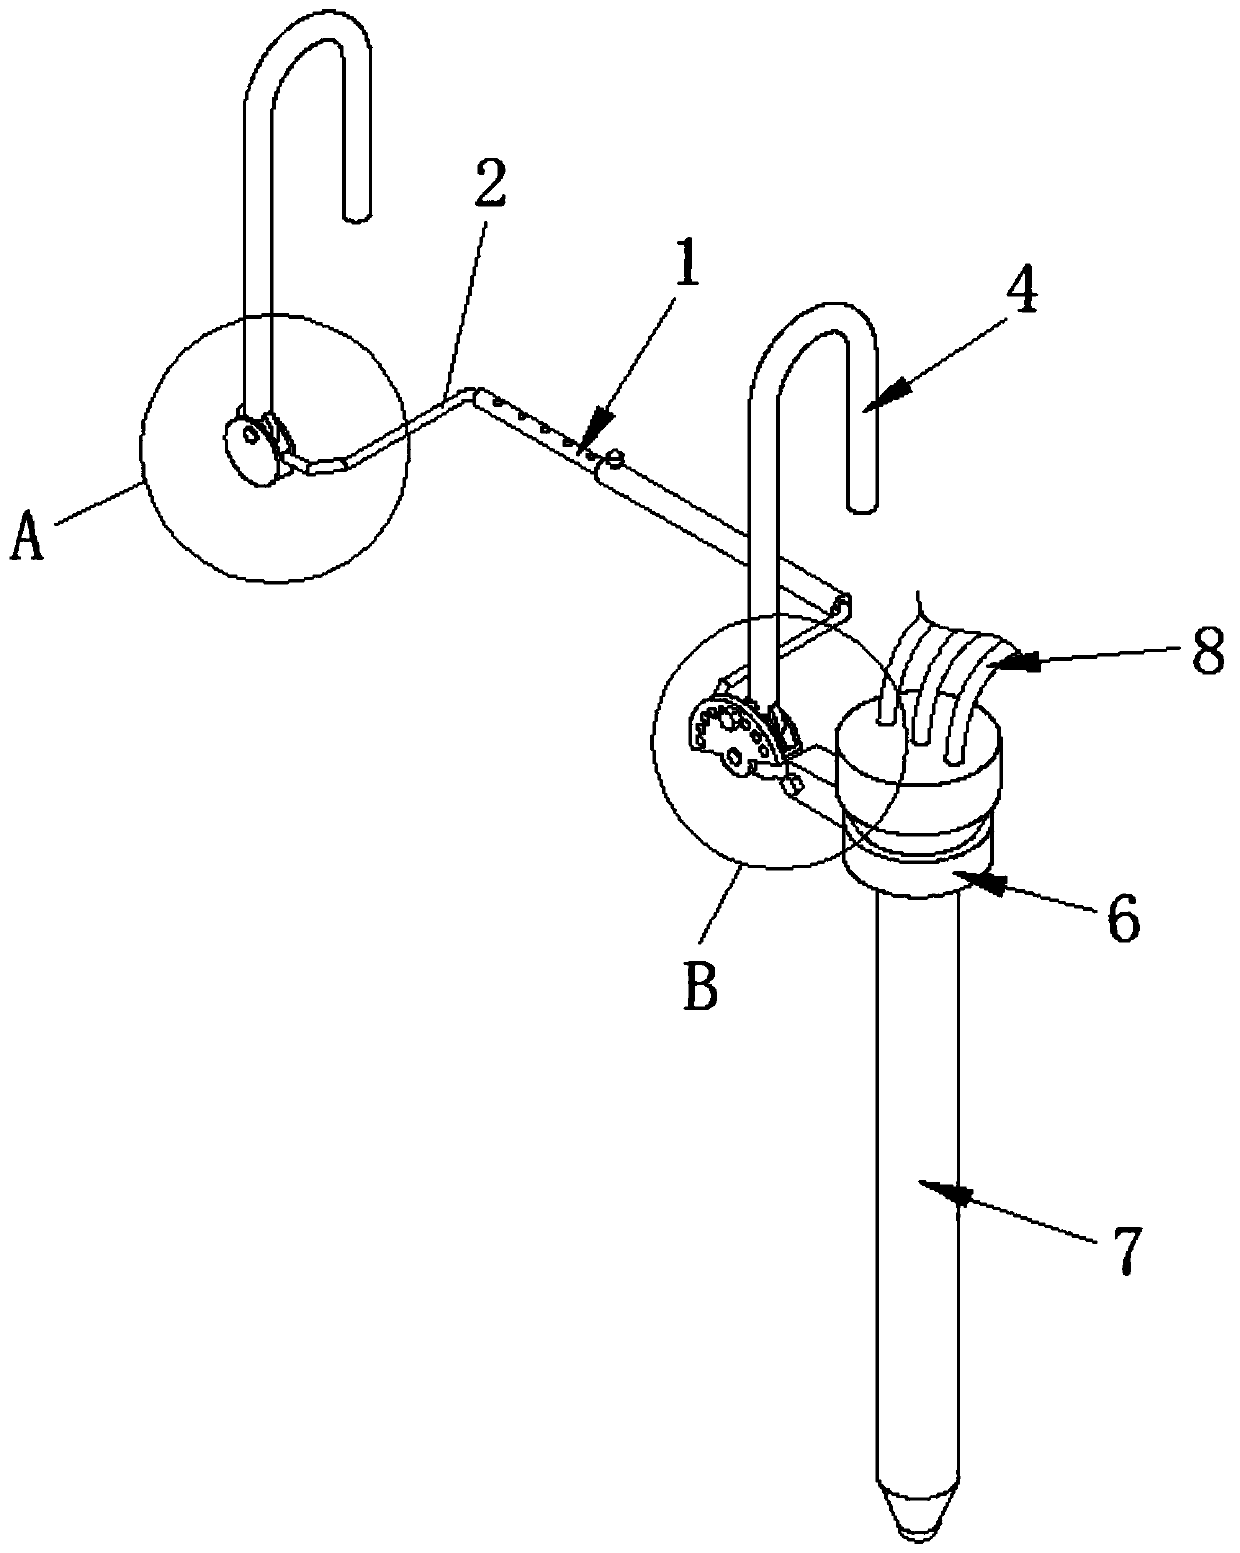 Improved ear-hanging fixing device for temporary pipelines in hemodialysis